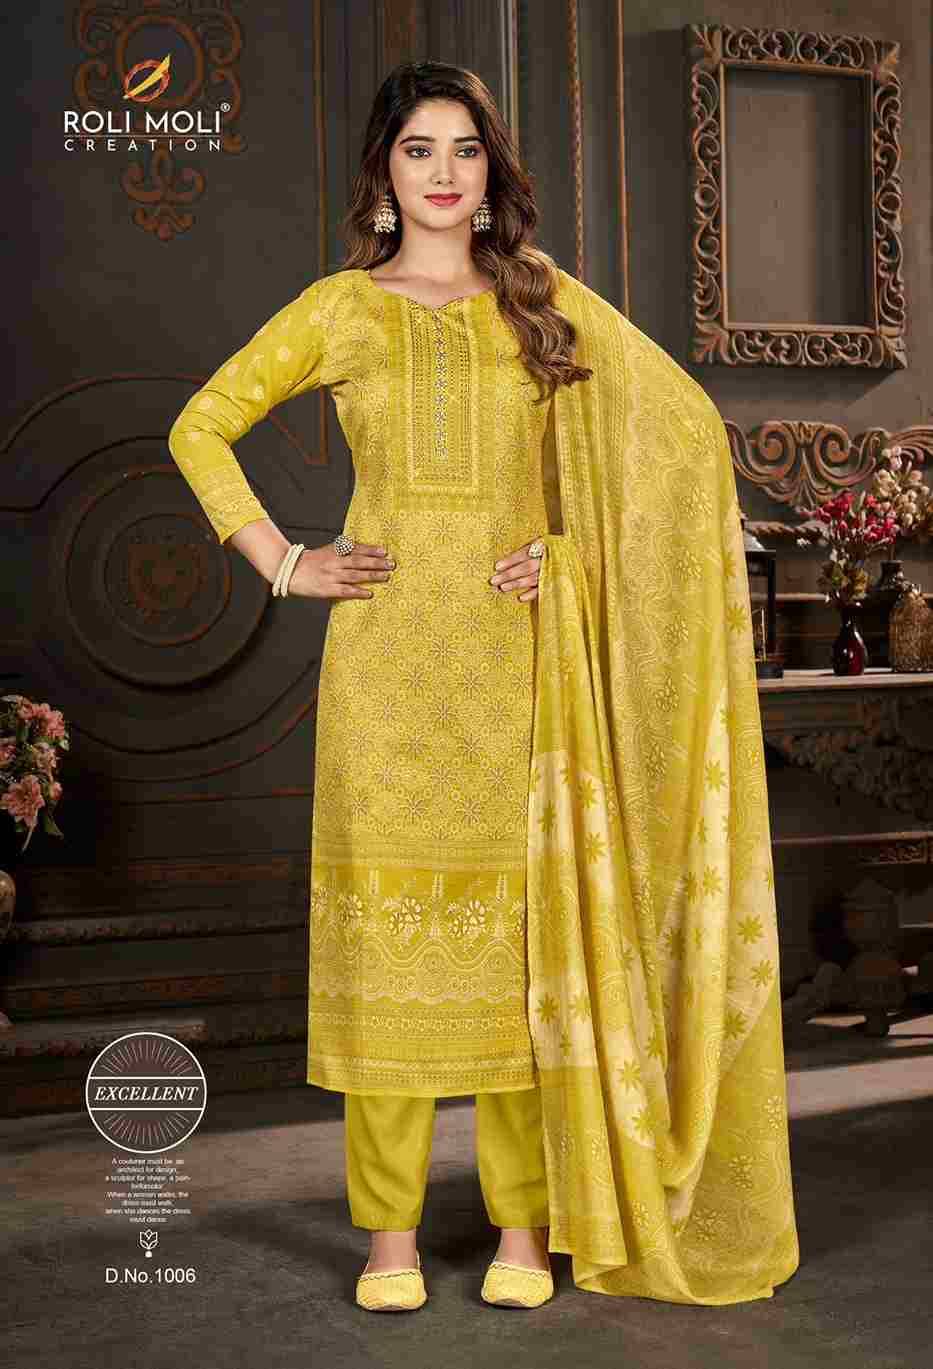 Sirat By Roli Moli 1001 To 1008 Series Beautiful Stylish Festive Suits Fancy Colorful Casual Wear & Ethnic Wear & Ready To Wear Cotton Dresses At Wholesale Price